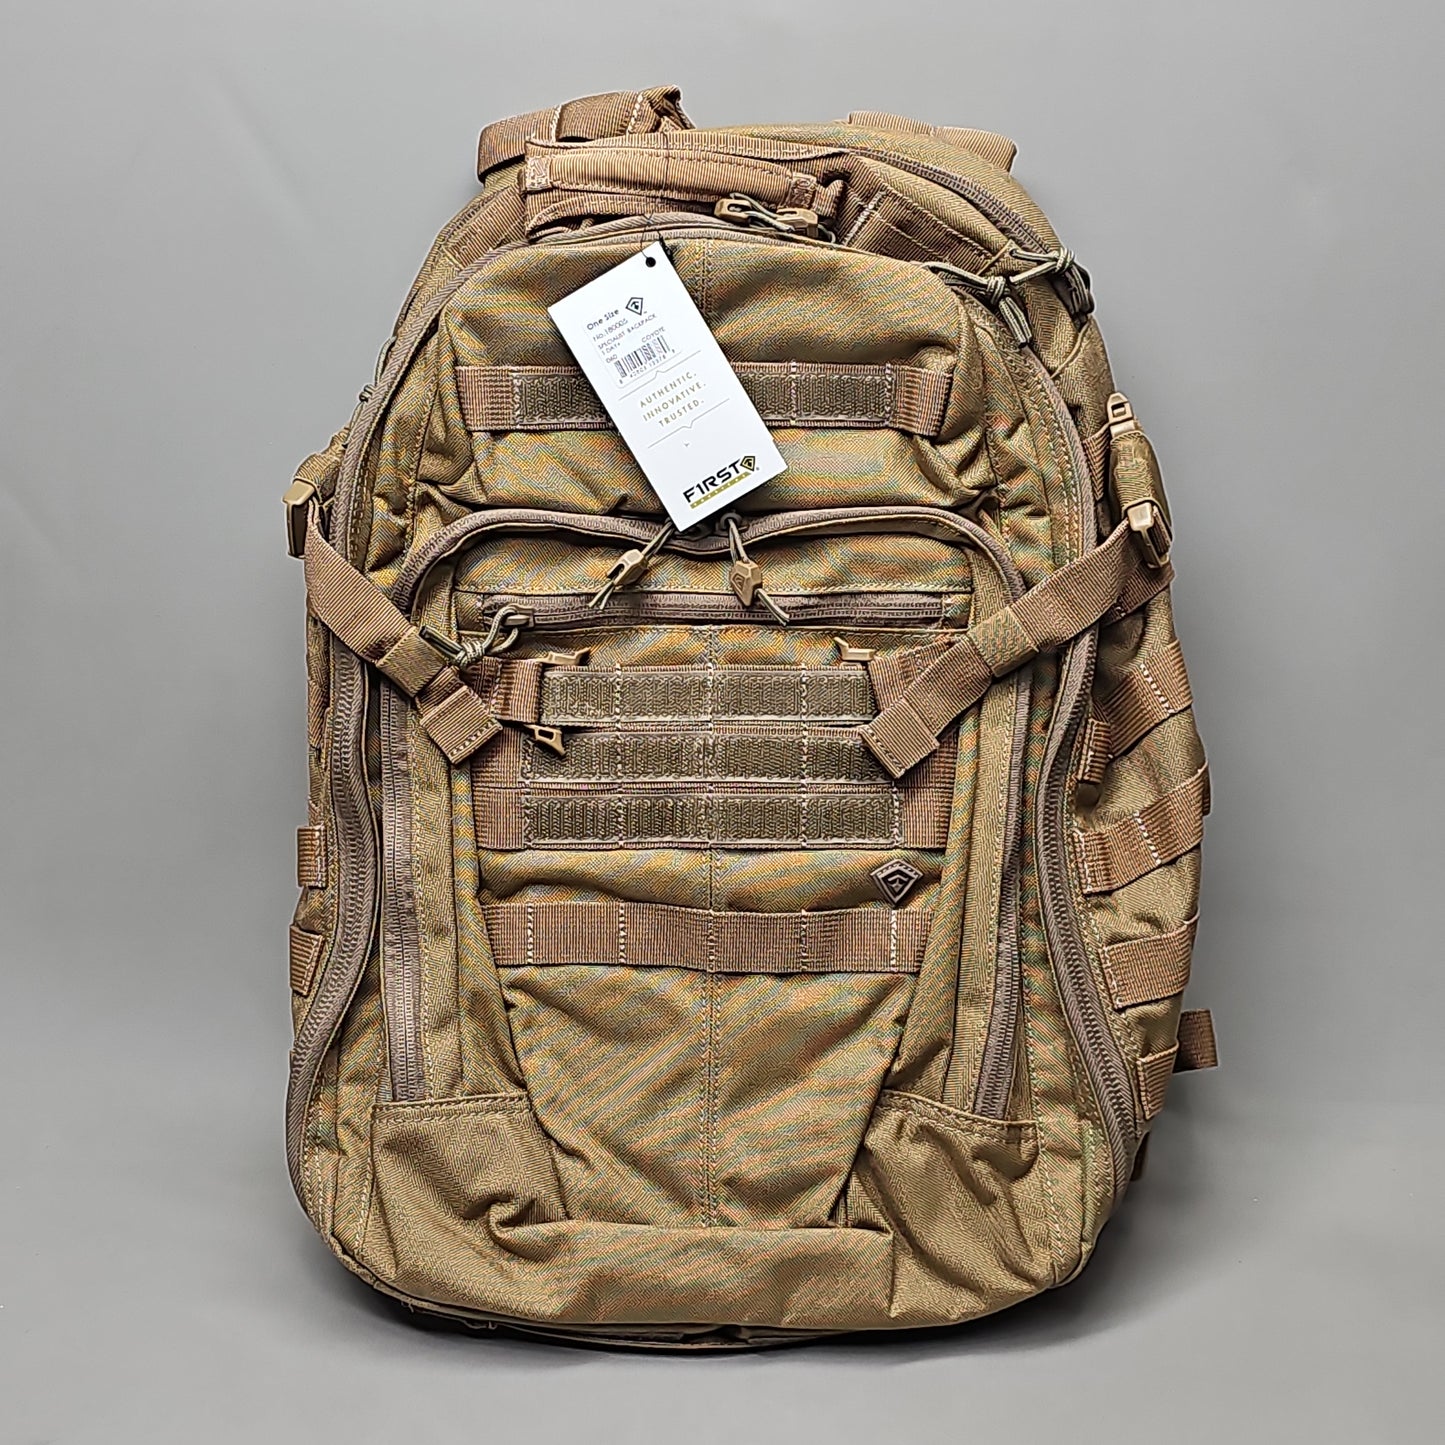 FIRST TACTICAL Specialist 1-Day Backpack 36L Coyote #180005 (New)